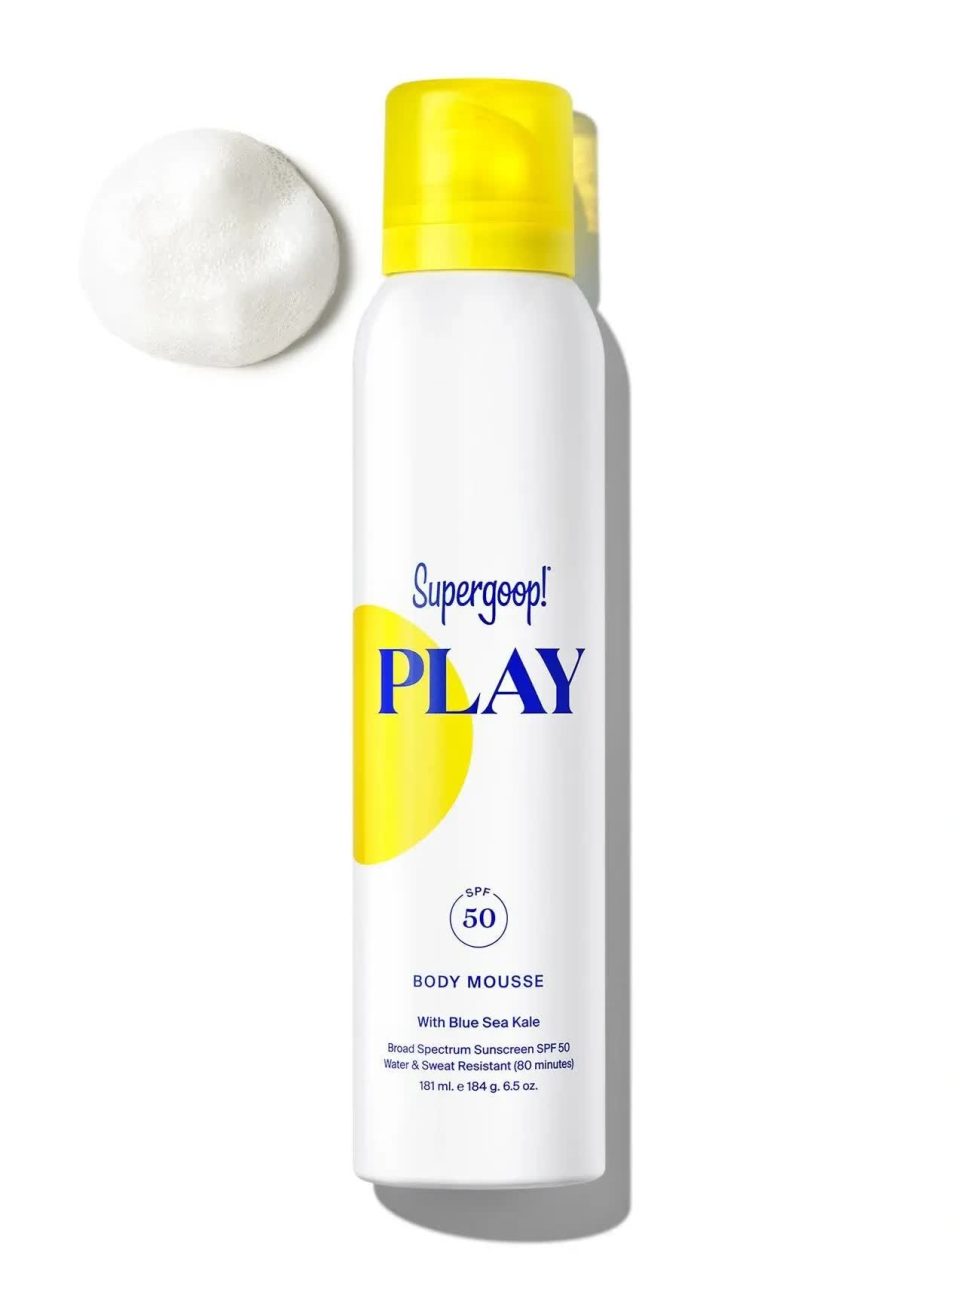 supergoop-play-body-mousse-spf-50-with-blue-sea-kale-181ml-pack-and-texture